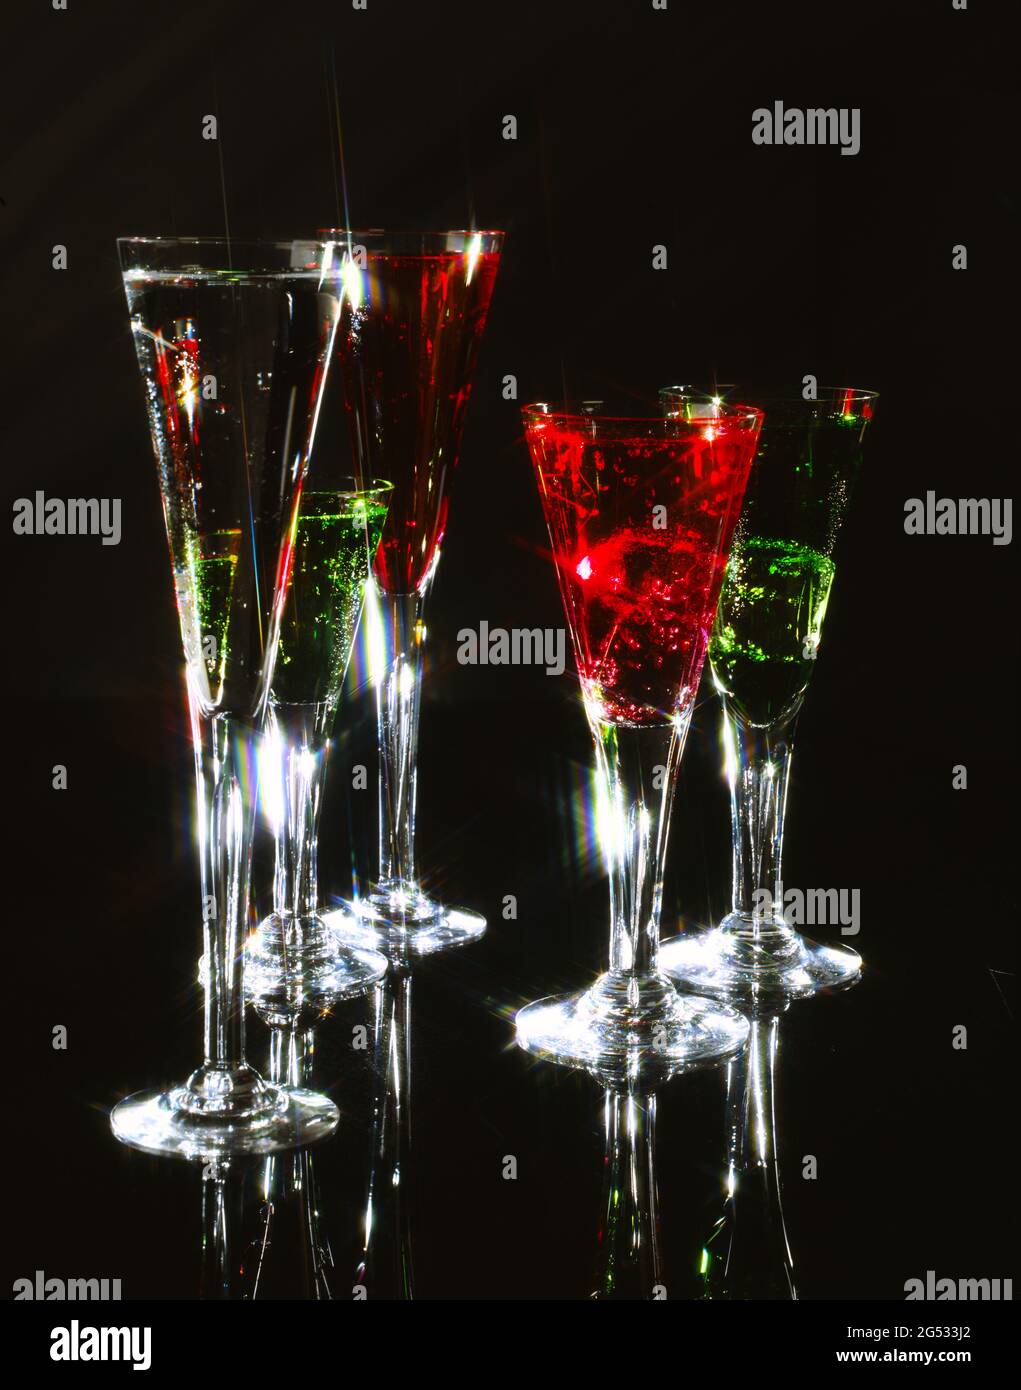 portrait/upright format fluted cocktail glasses containing red and green liquid drinks on black perspex/plexiglass shiny background with starburst Stock Photo